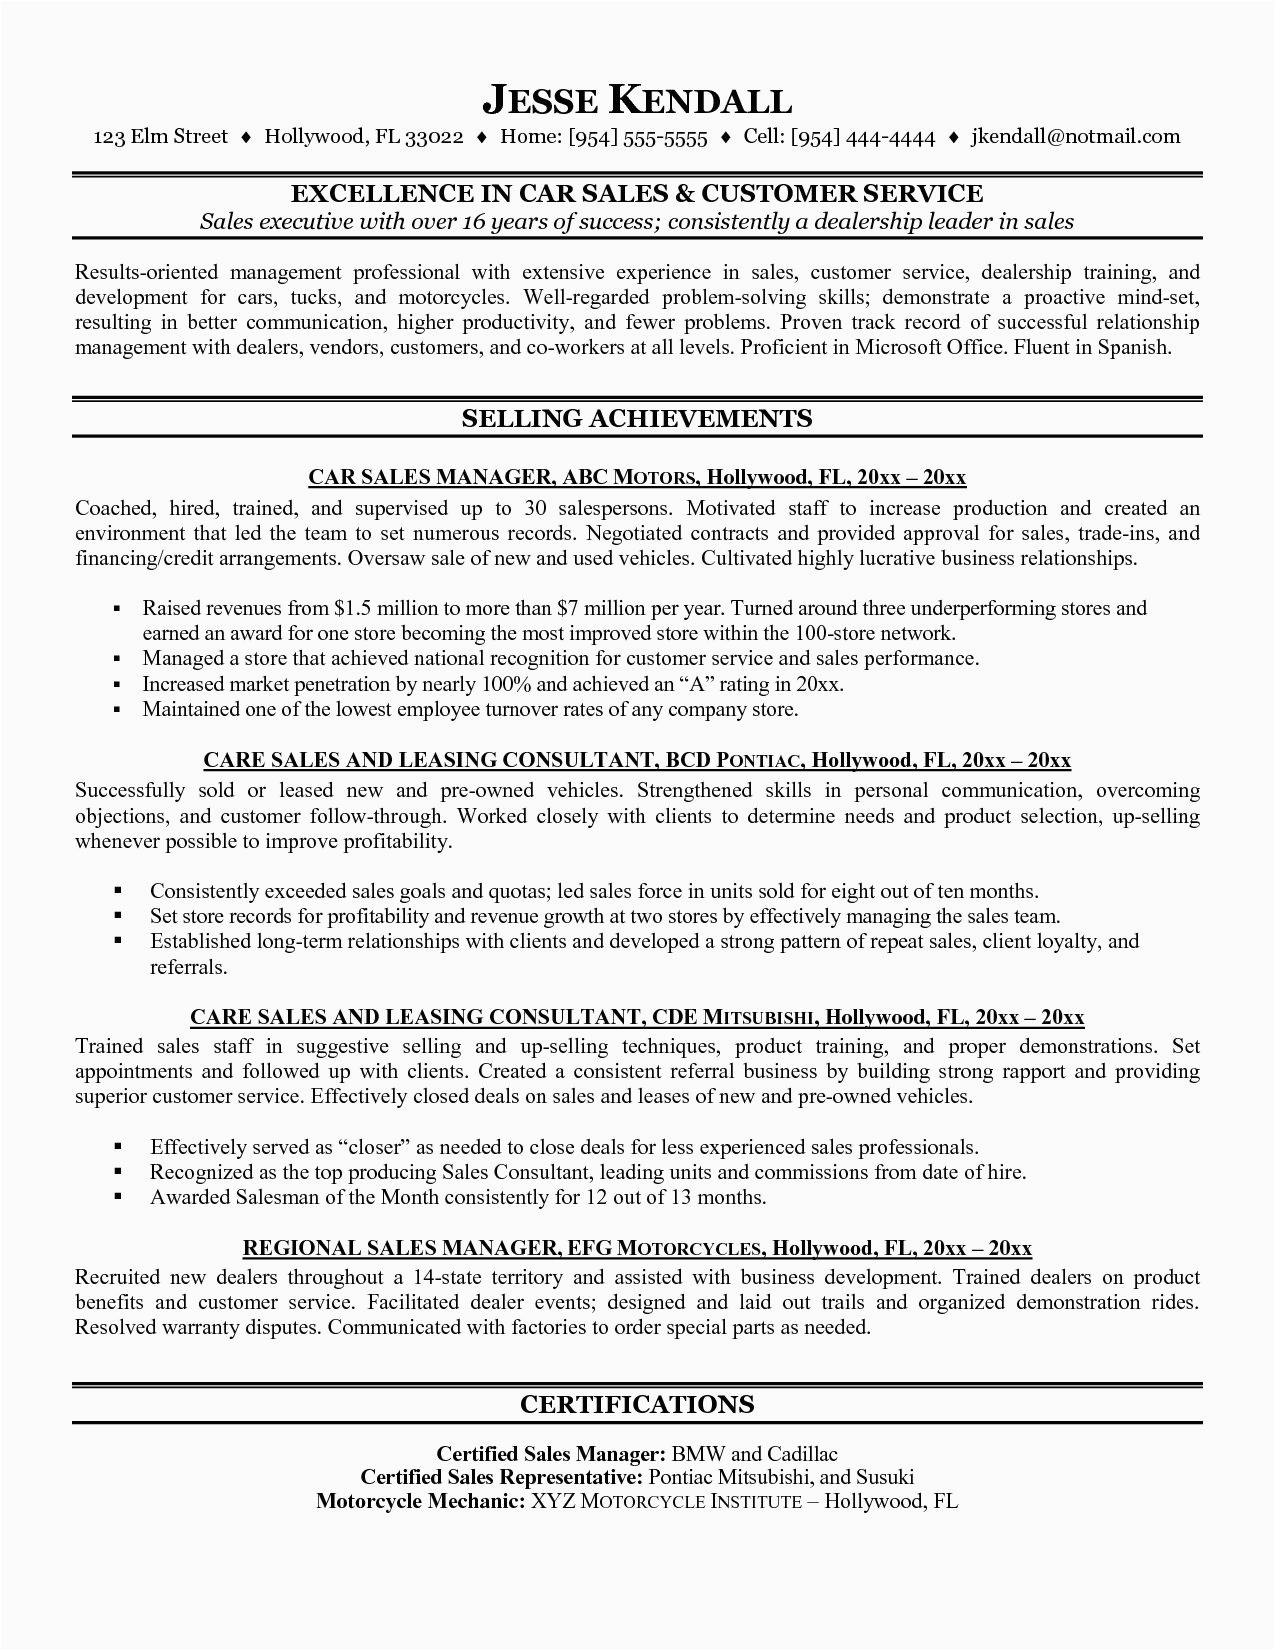 Sample Resume for Sales Manager In Fmcg Pin On Resume Templates